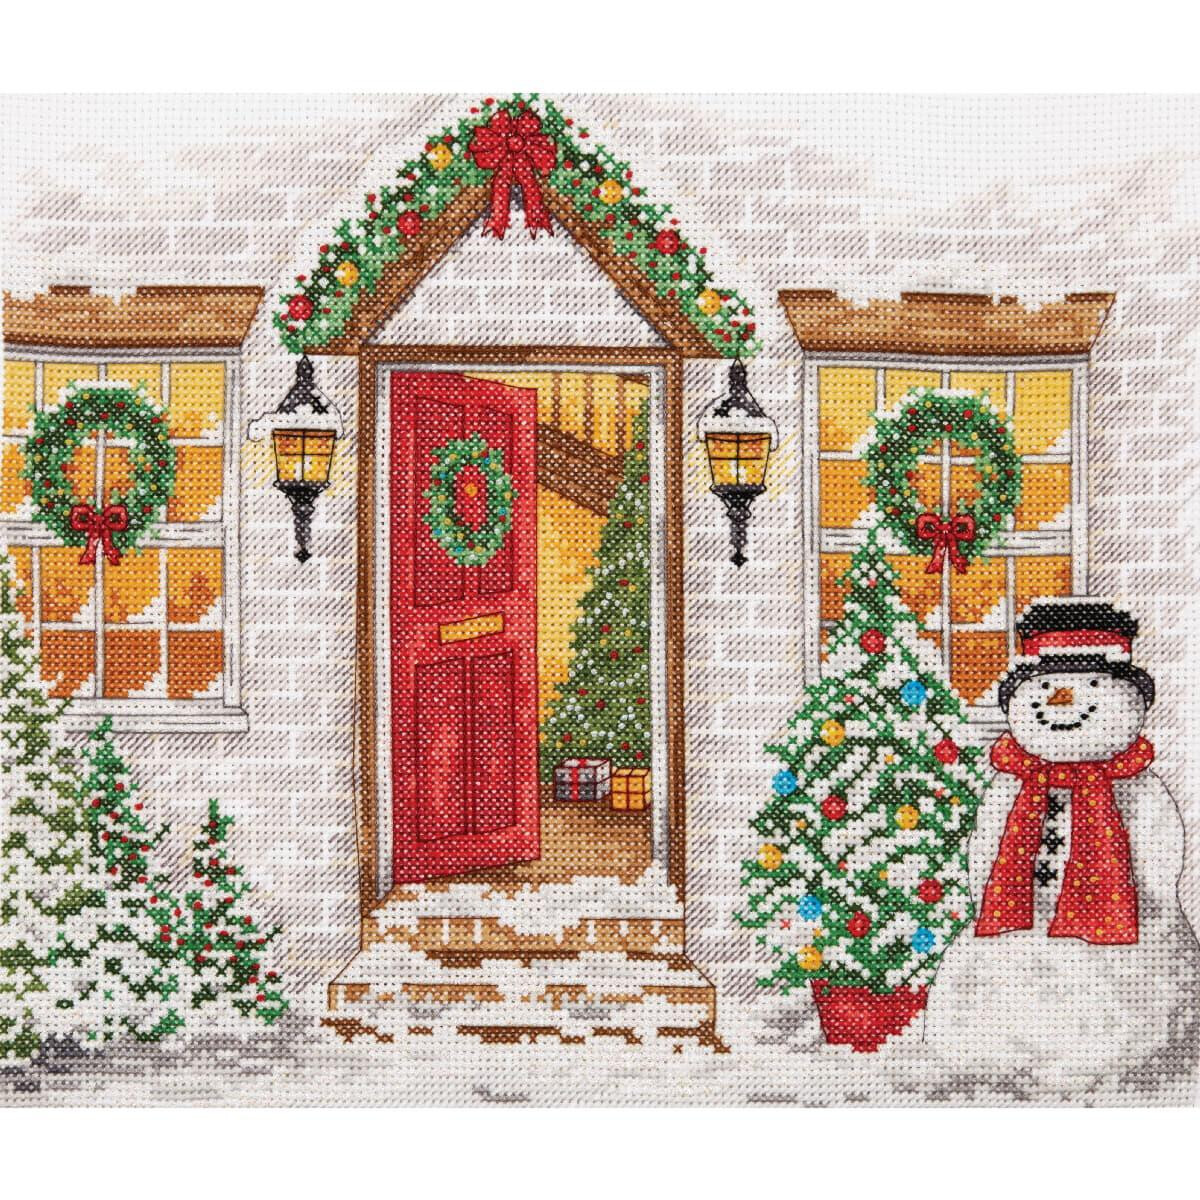 Anchor counted cross stitch kit "Christmas...